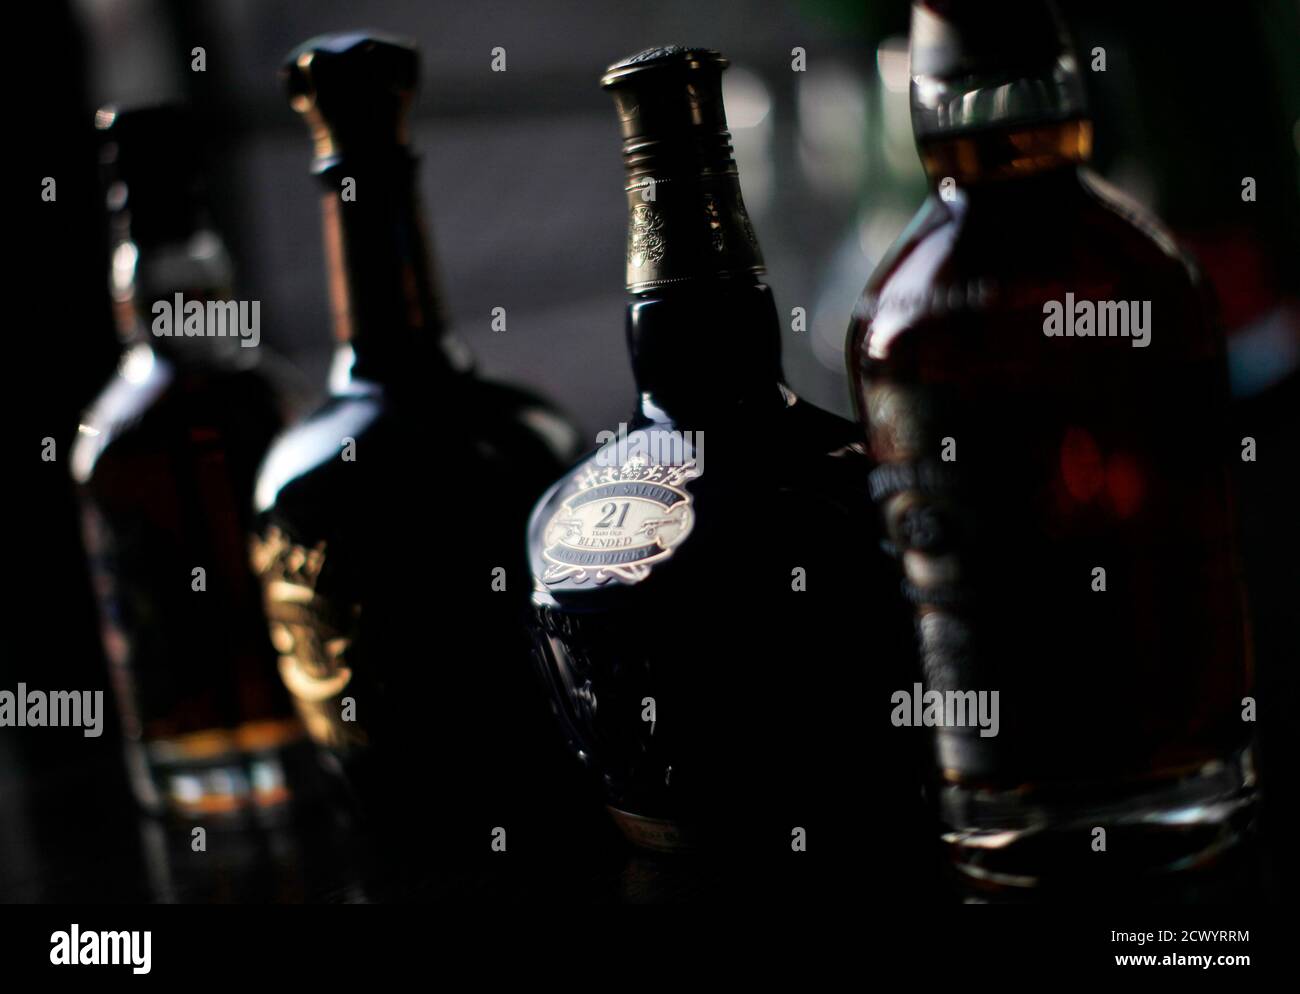 Bottles of Chivas Regal are seen on a table during a Reuters interview with Darren Hosie, Regional Manager of Chivas Brothers in Shanghai, December 8, 2010. Born and bred in Glasgow, 37-year-old Darren Hosie has spent the past seven years working for scotch whisky giant Pernod Ricard and since August 2007, he has lived in China as international brand ambassador for the firm's top whisky brands Chivas Regal, Ballantine's and The Glenlivet. Hosie is well accustomed to the tastes and whims of the country's new business elite -- the legions of bankers, entrepreneurs, traders and second-generation  Stock Photo